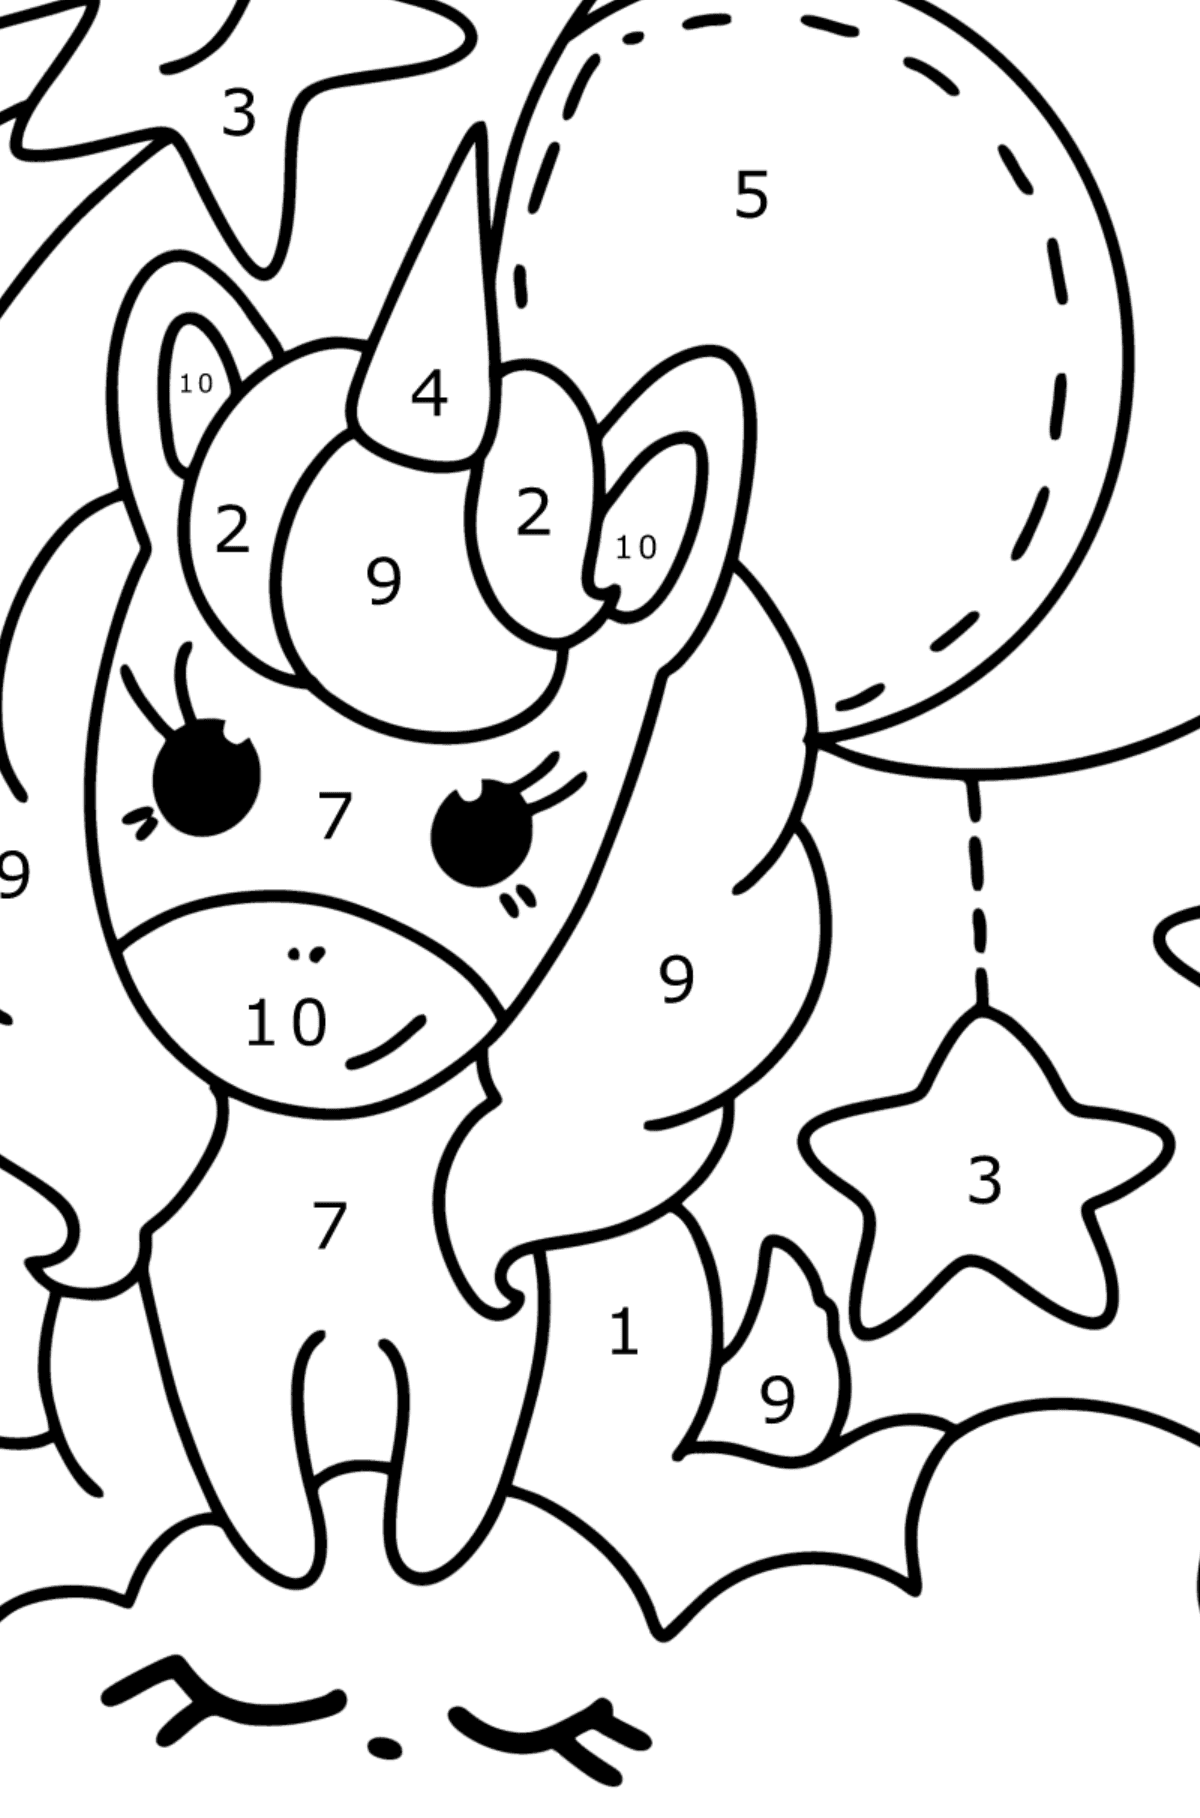 Moon unicorn coloring page - Coloring by Numbers for Kids